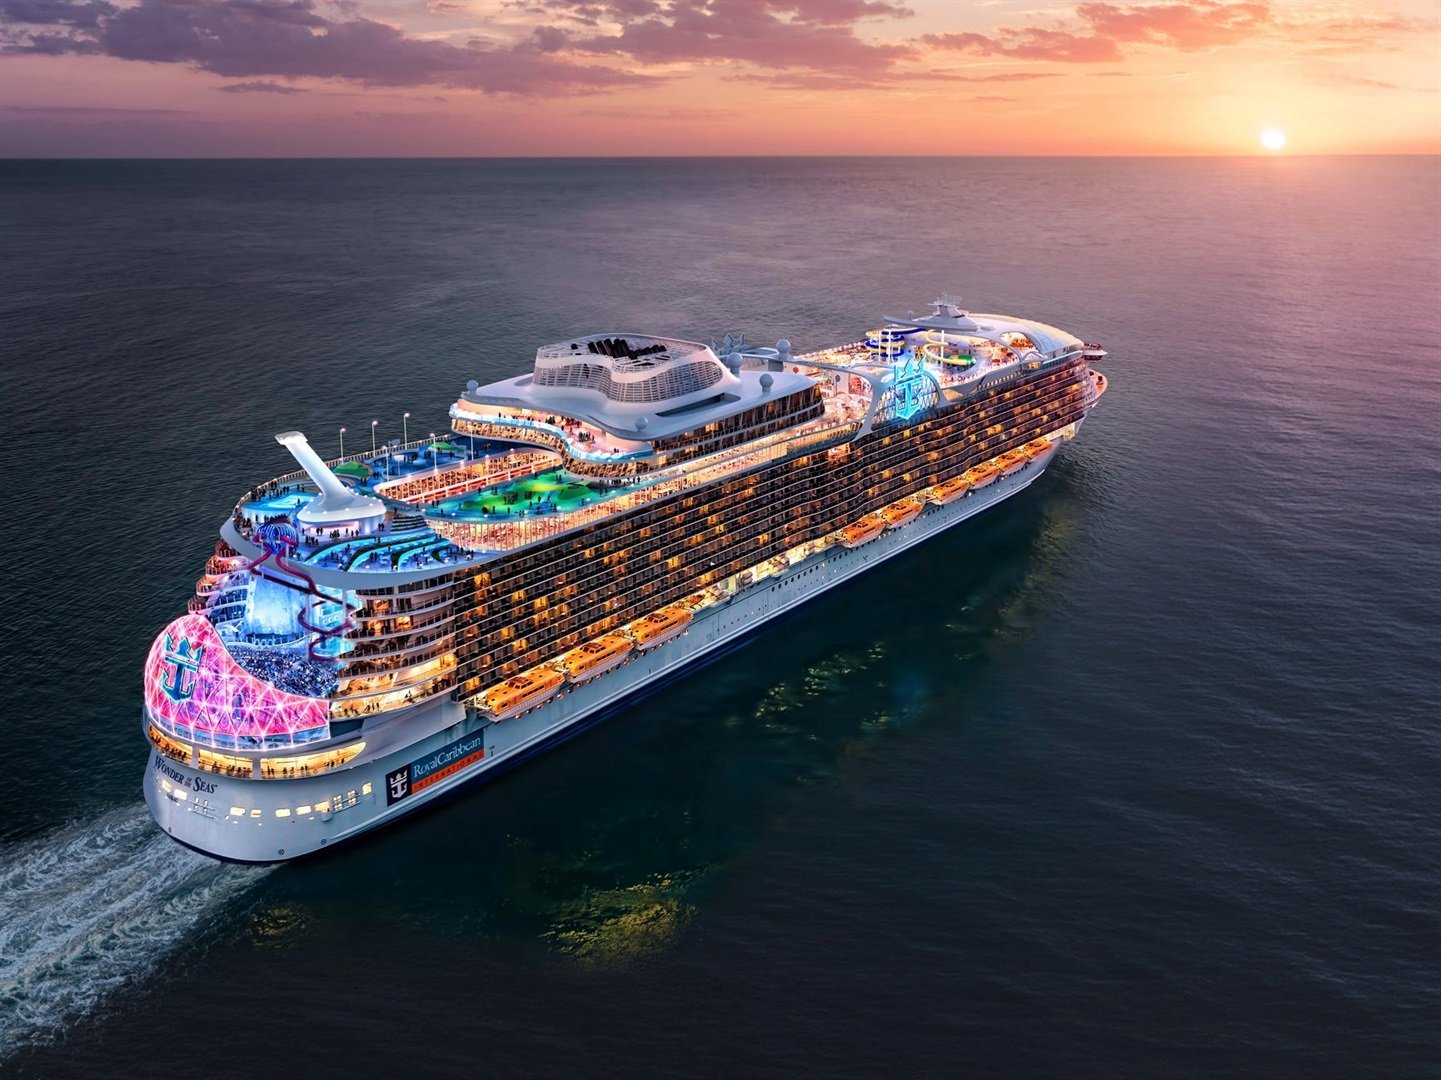 Royal Caribbean is building the new world's largest cruise ship despite